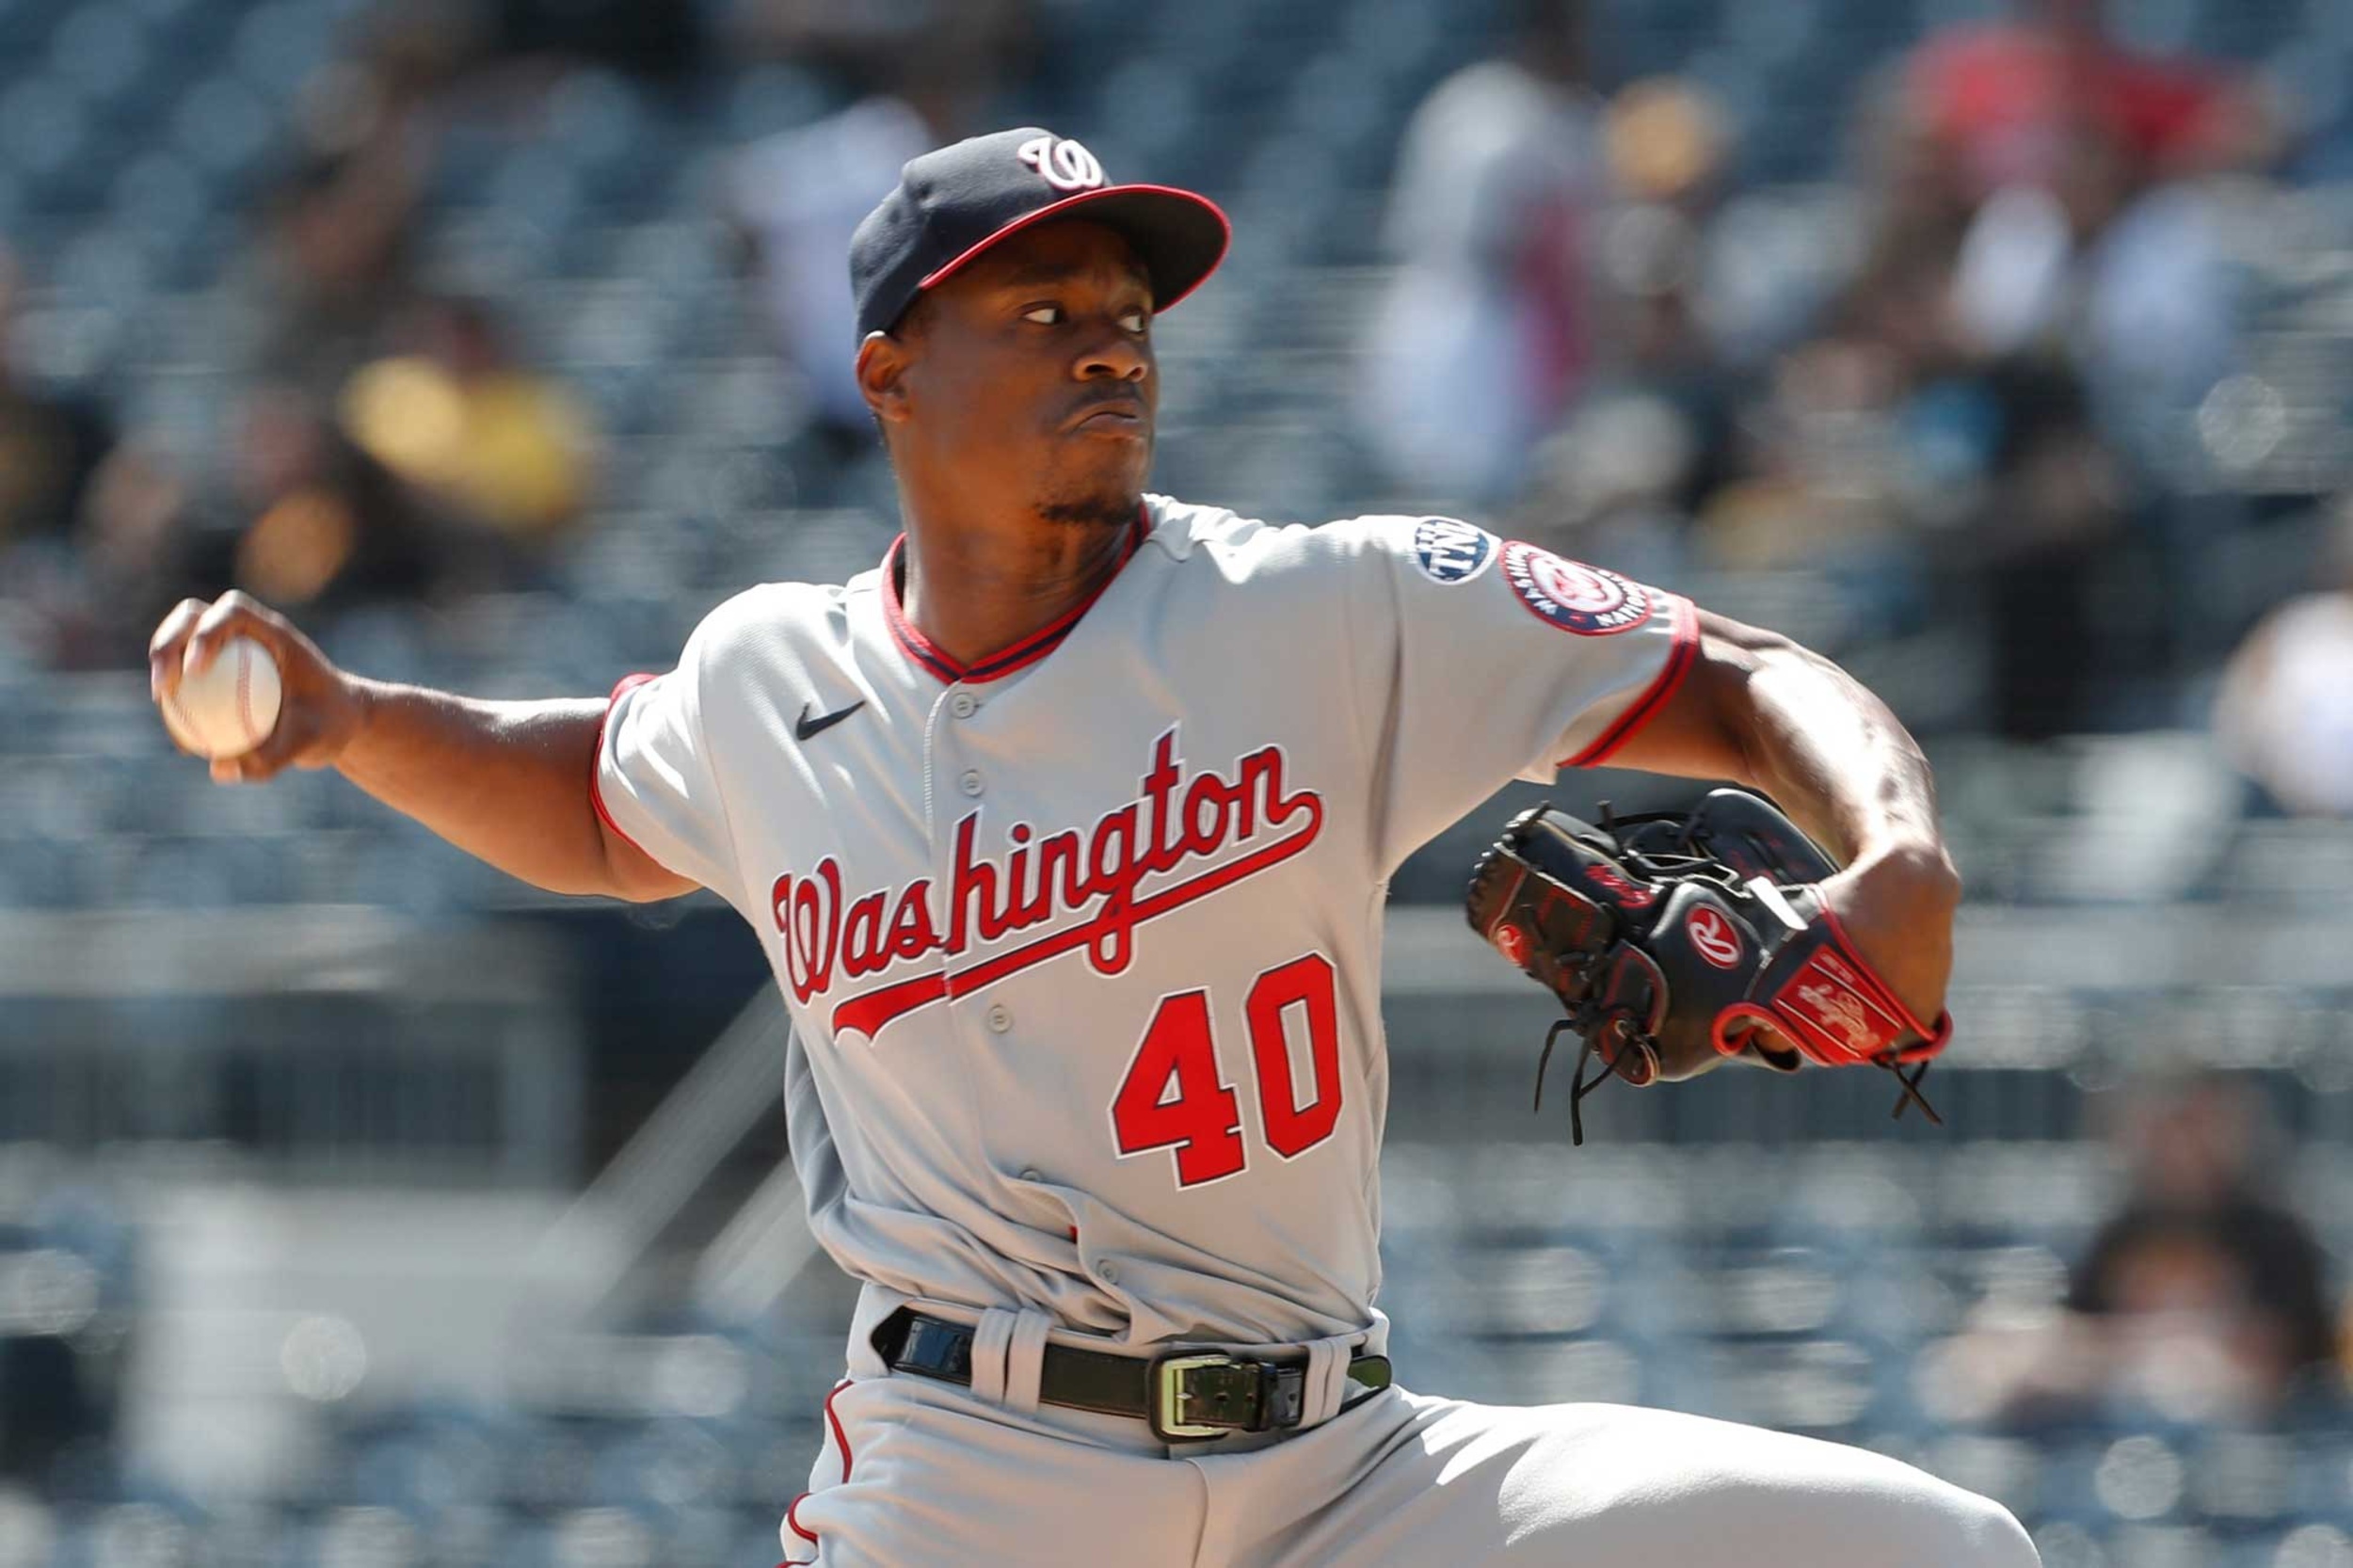 <p>Gray became Washington's ace last season, making an All-Star appearance and posting a 3.91 ERA in 30 starts. Still, he struggled to throw strikes and wore down in the second half of the season. Gray's development this season will play a huge role in the team's success.</p><p><a href='https://www.msn.com/en-us/community/channel/vid-cj9pqbr0vn9in2b6ddcd8sfgpfq6x6utp44fssrv6mc2gtybw0us'>Did you enjoy this slideshow? Follow us on MSN to see more of our exclusive MLB content.</a></p>